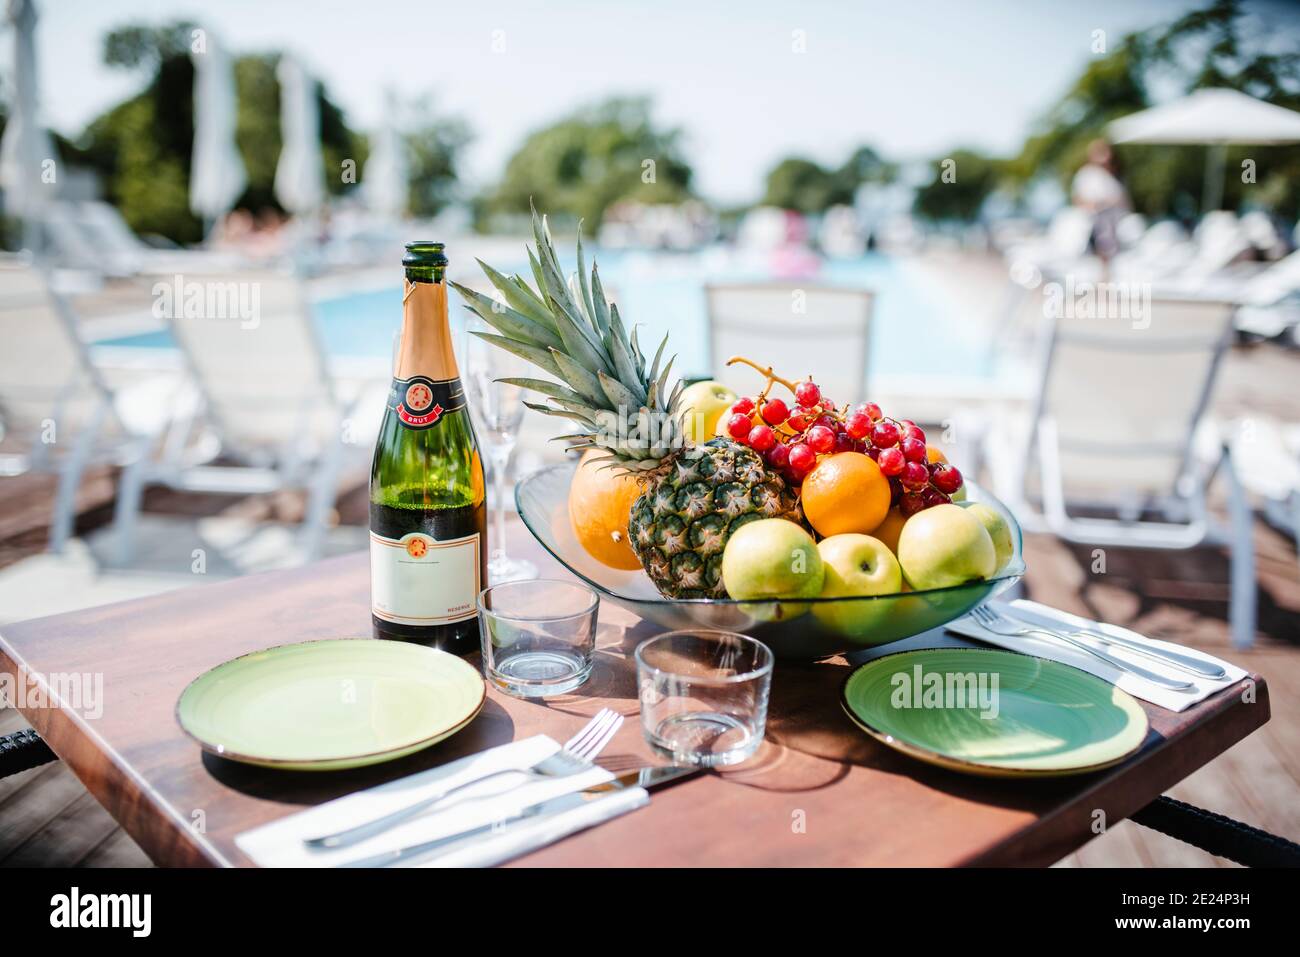 Table set for two with champagne bottle and bowl of fruits Stock Photo